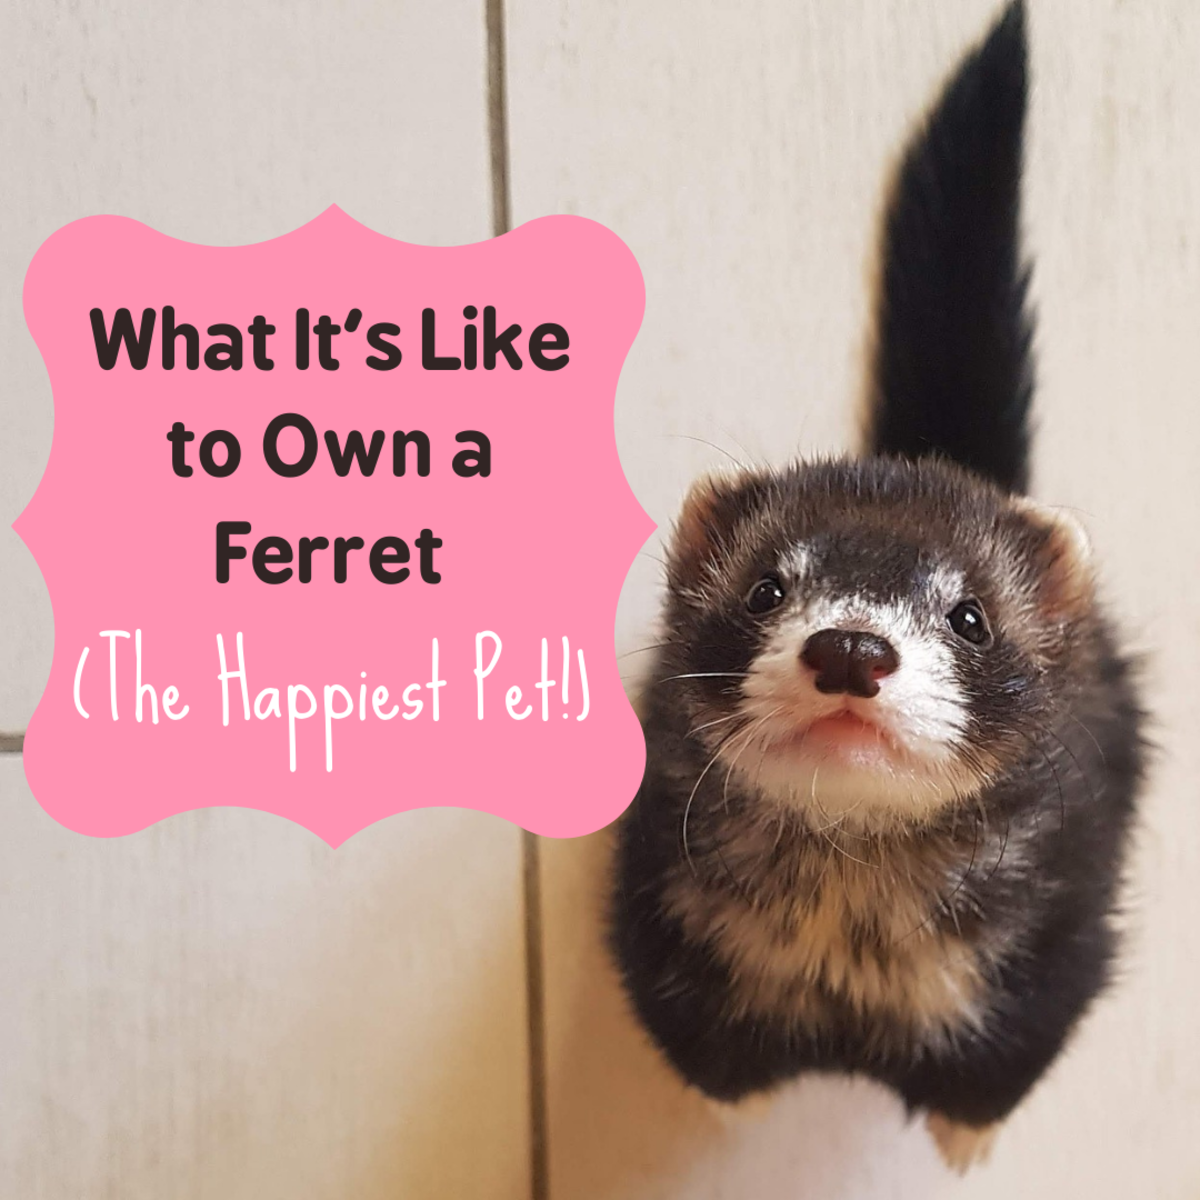 Why Ferrets Are the Happiest Pets